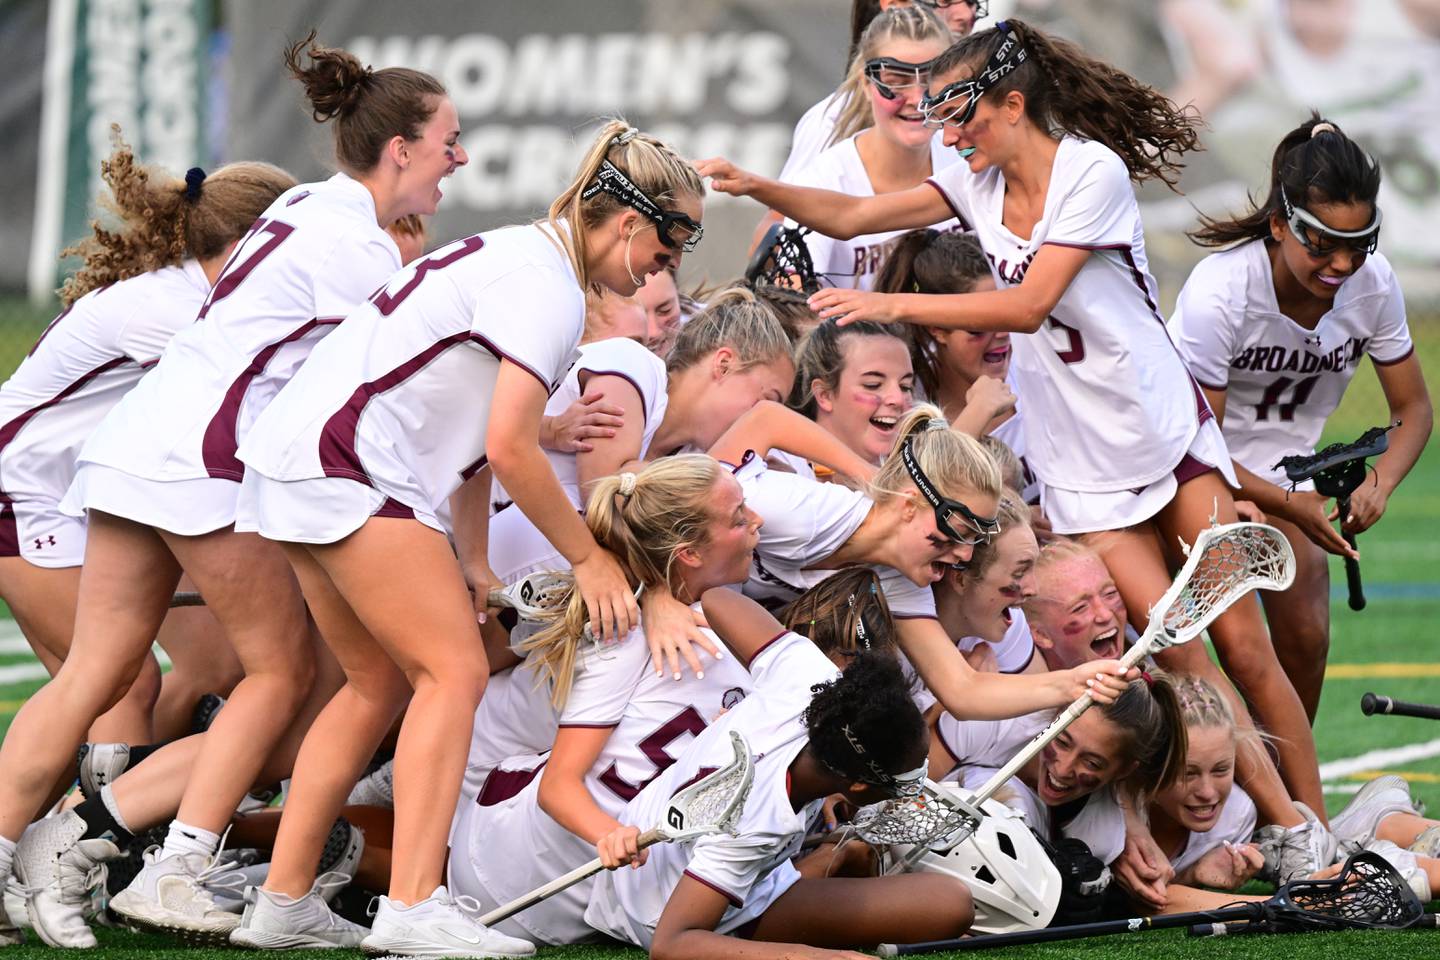 The Broadneck girls lacrosse team piles up in celebration following their 9-8 win over Dulaney in the Class 4A girls lacrosse state championship game at Stevenson University.